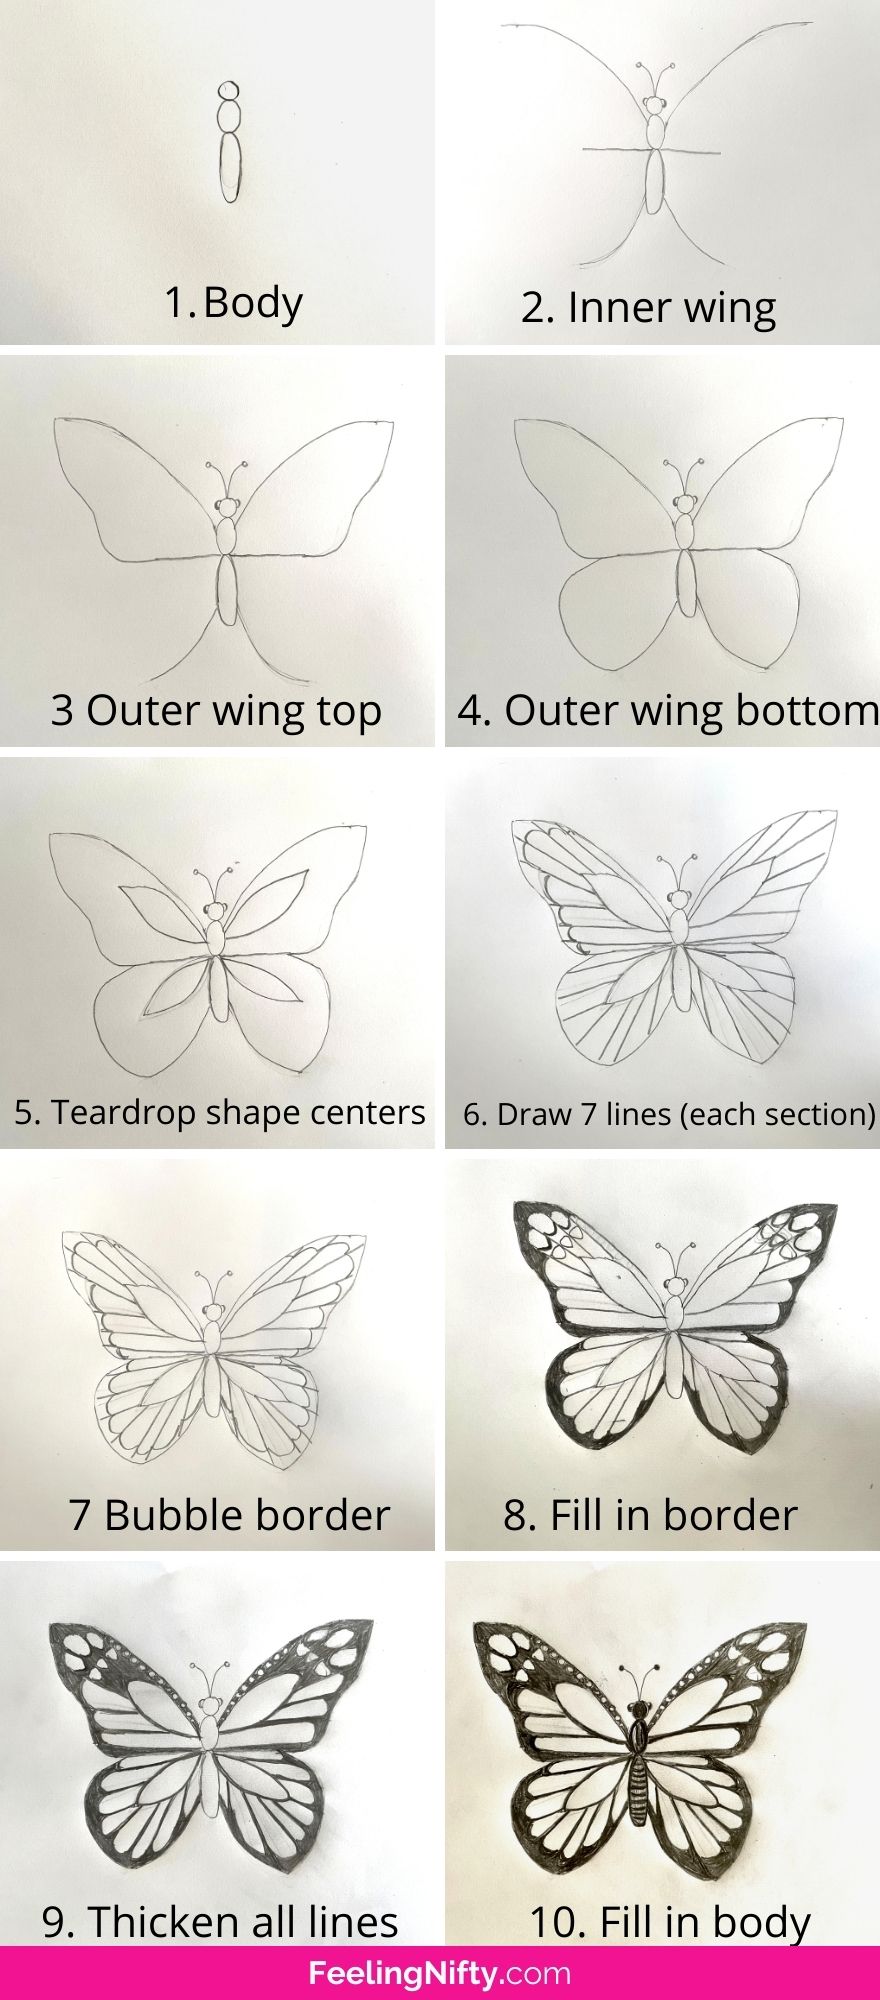 How to Draw a Butterfly - Step-by-Step Drawing Tutorial-vinhomehanoi.com.vn